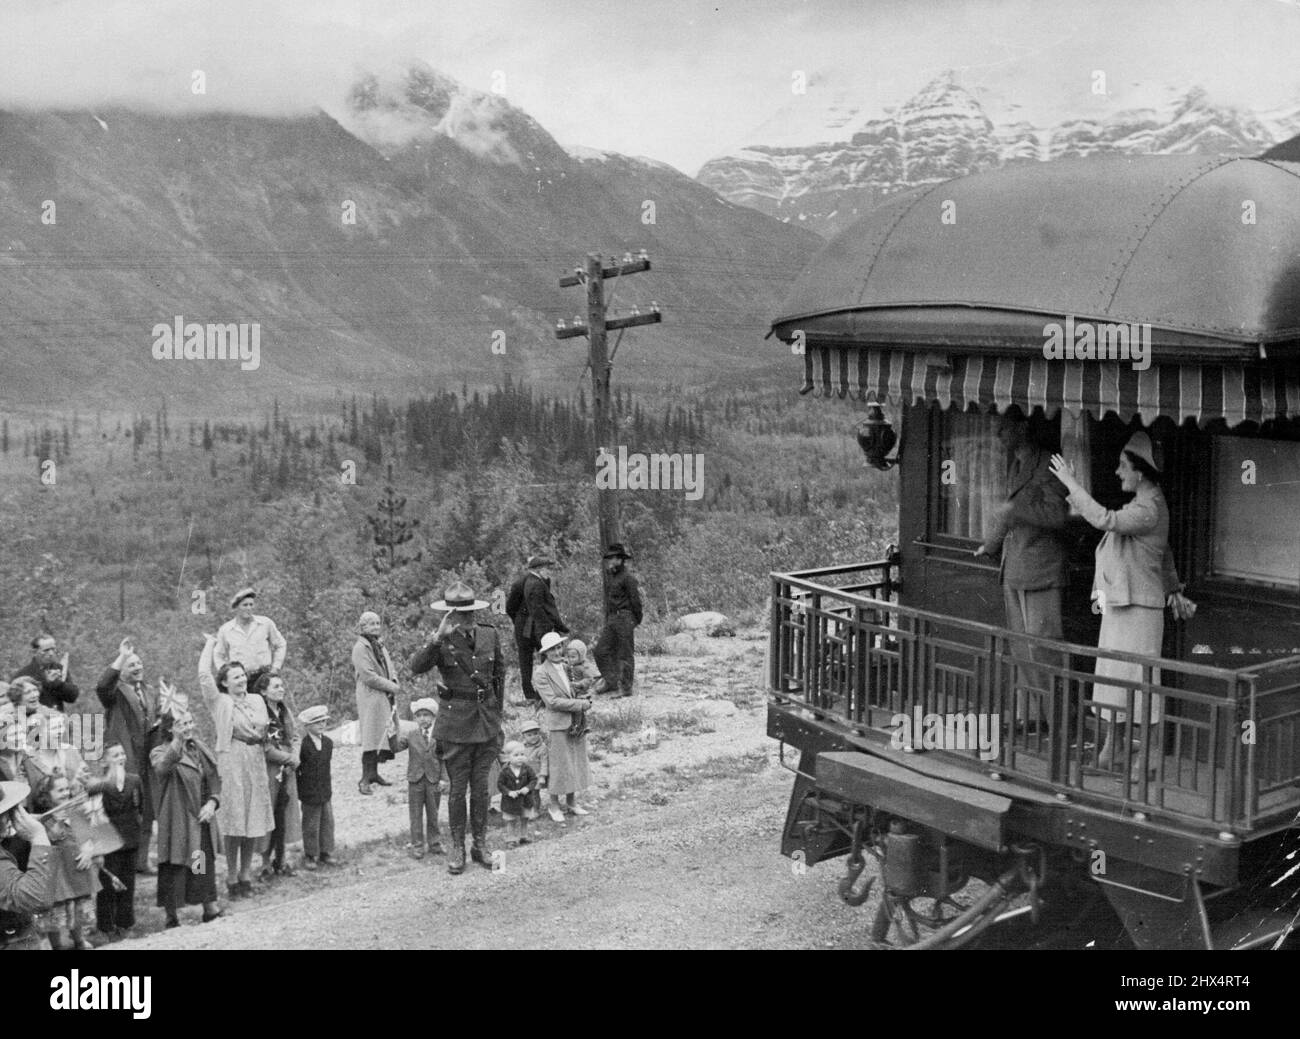 Royal Canadian Tour: The King and Queen in the Rockies -- Our photograph show the King and Queen on the rear platform of their coach, which the Rockies and the lower slopes of Mount Robson in the background. July 03, 1939. Stock Photo